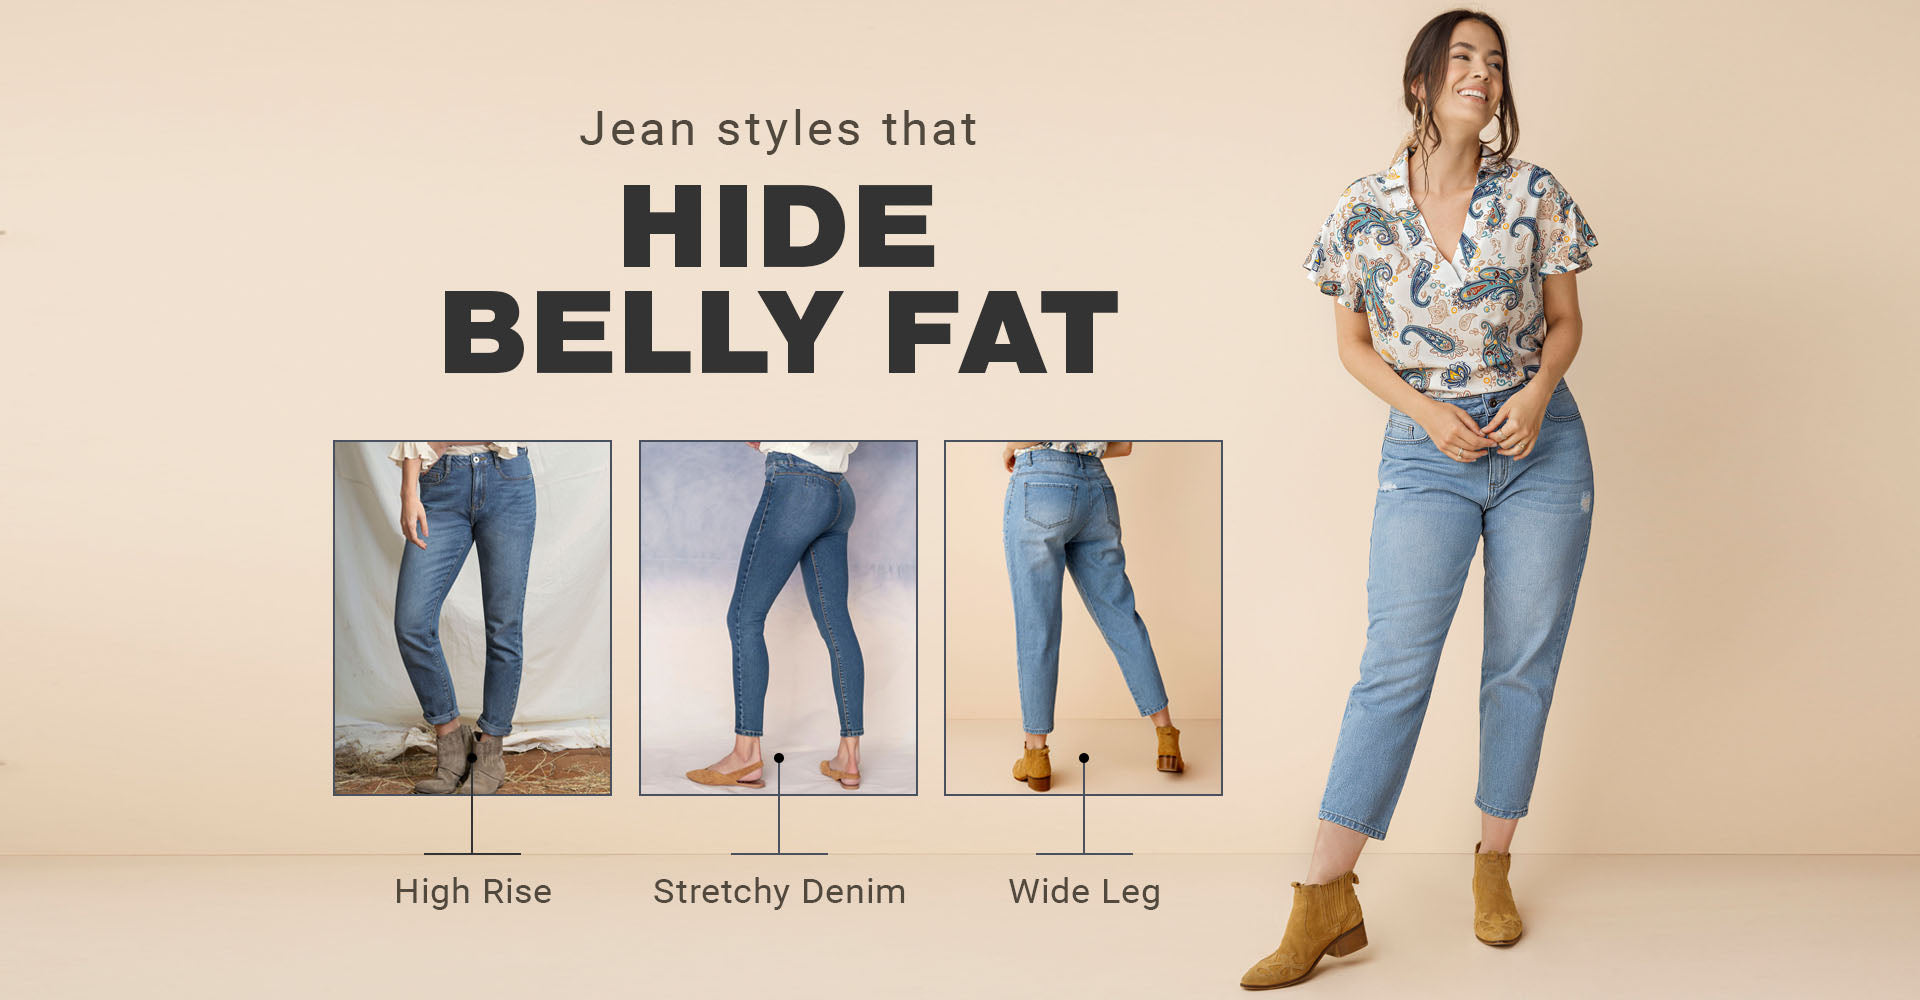 How to hide a belly fat in jeans